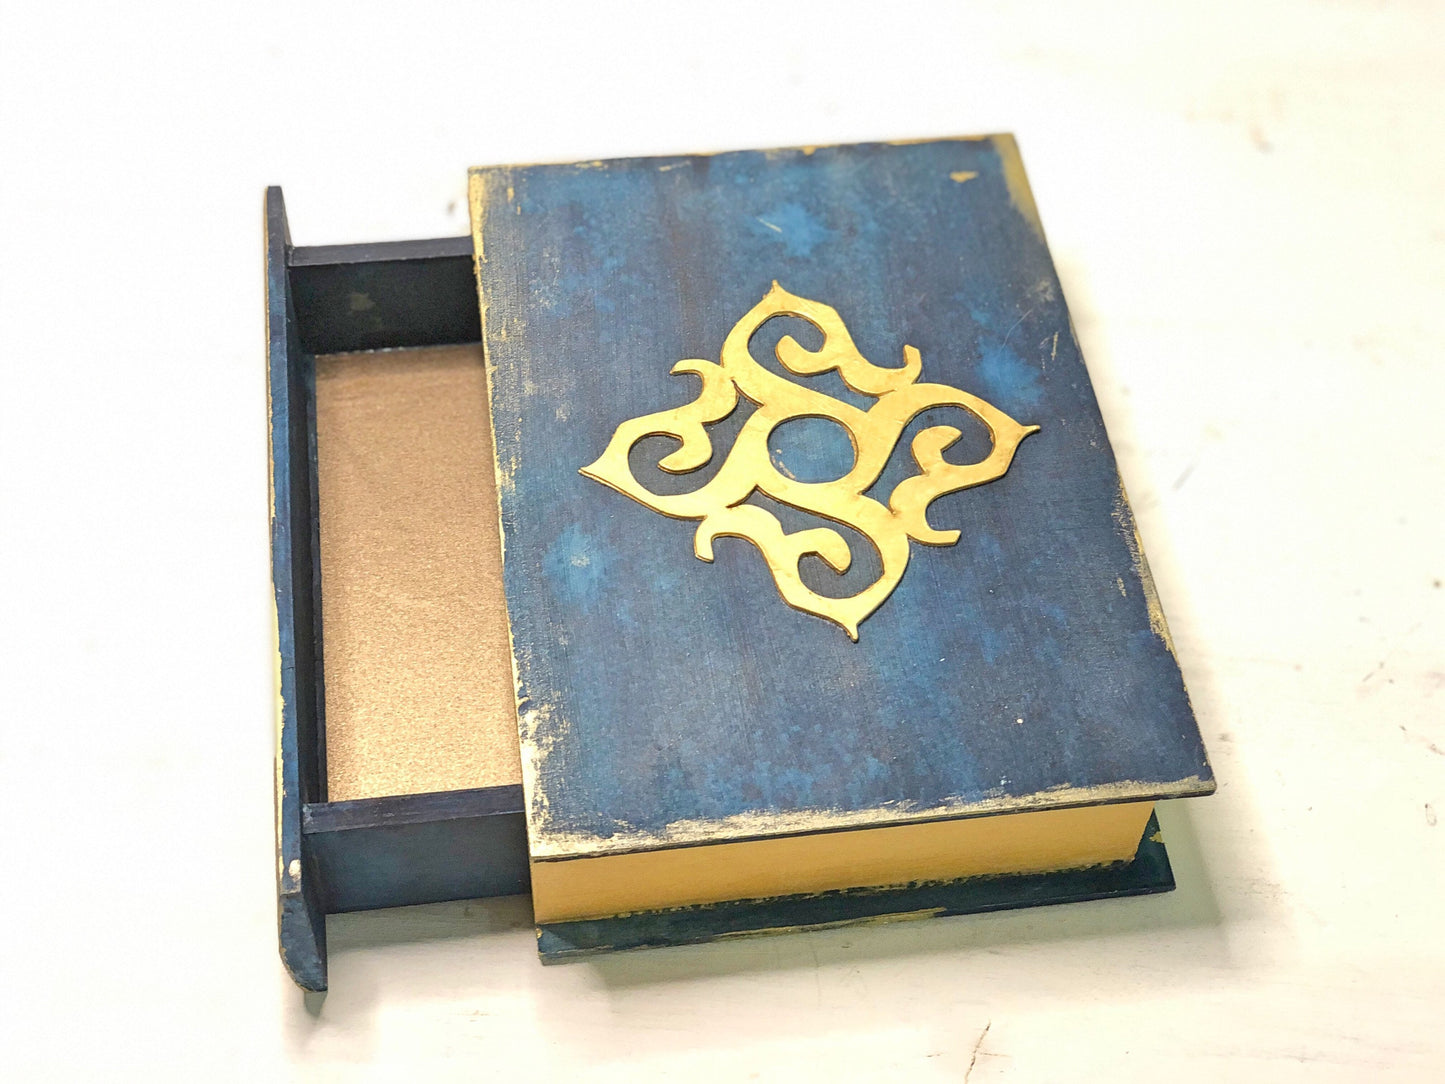 Spellbox with Eternity Magic Symbol, Fantasy Book Box with Secret Spine Drawer, Gift for Fantasy and Witchcraft Lovers, Dice Box